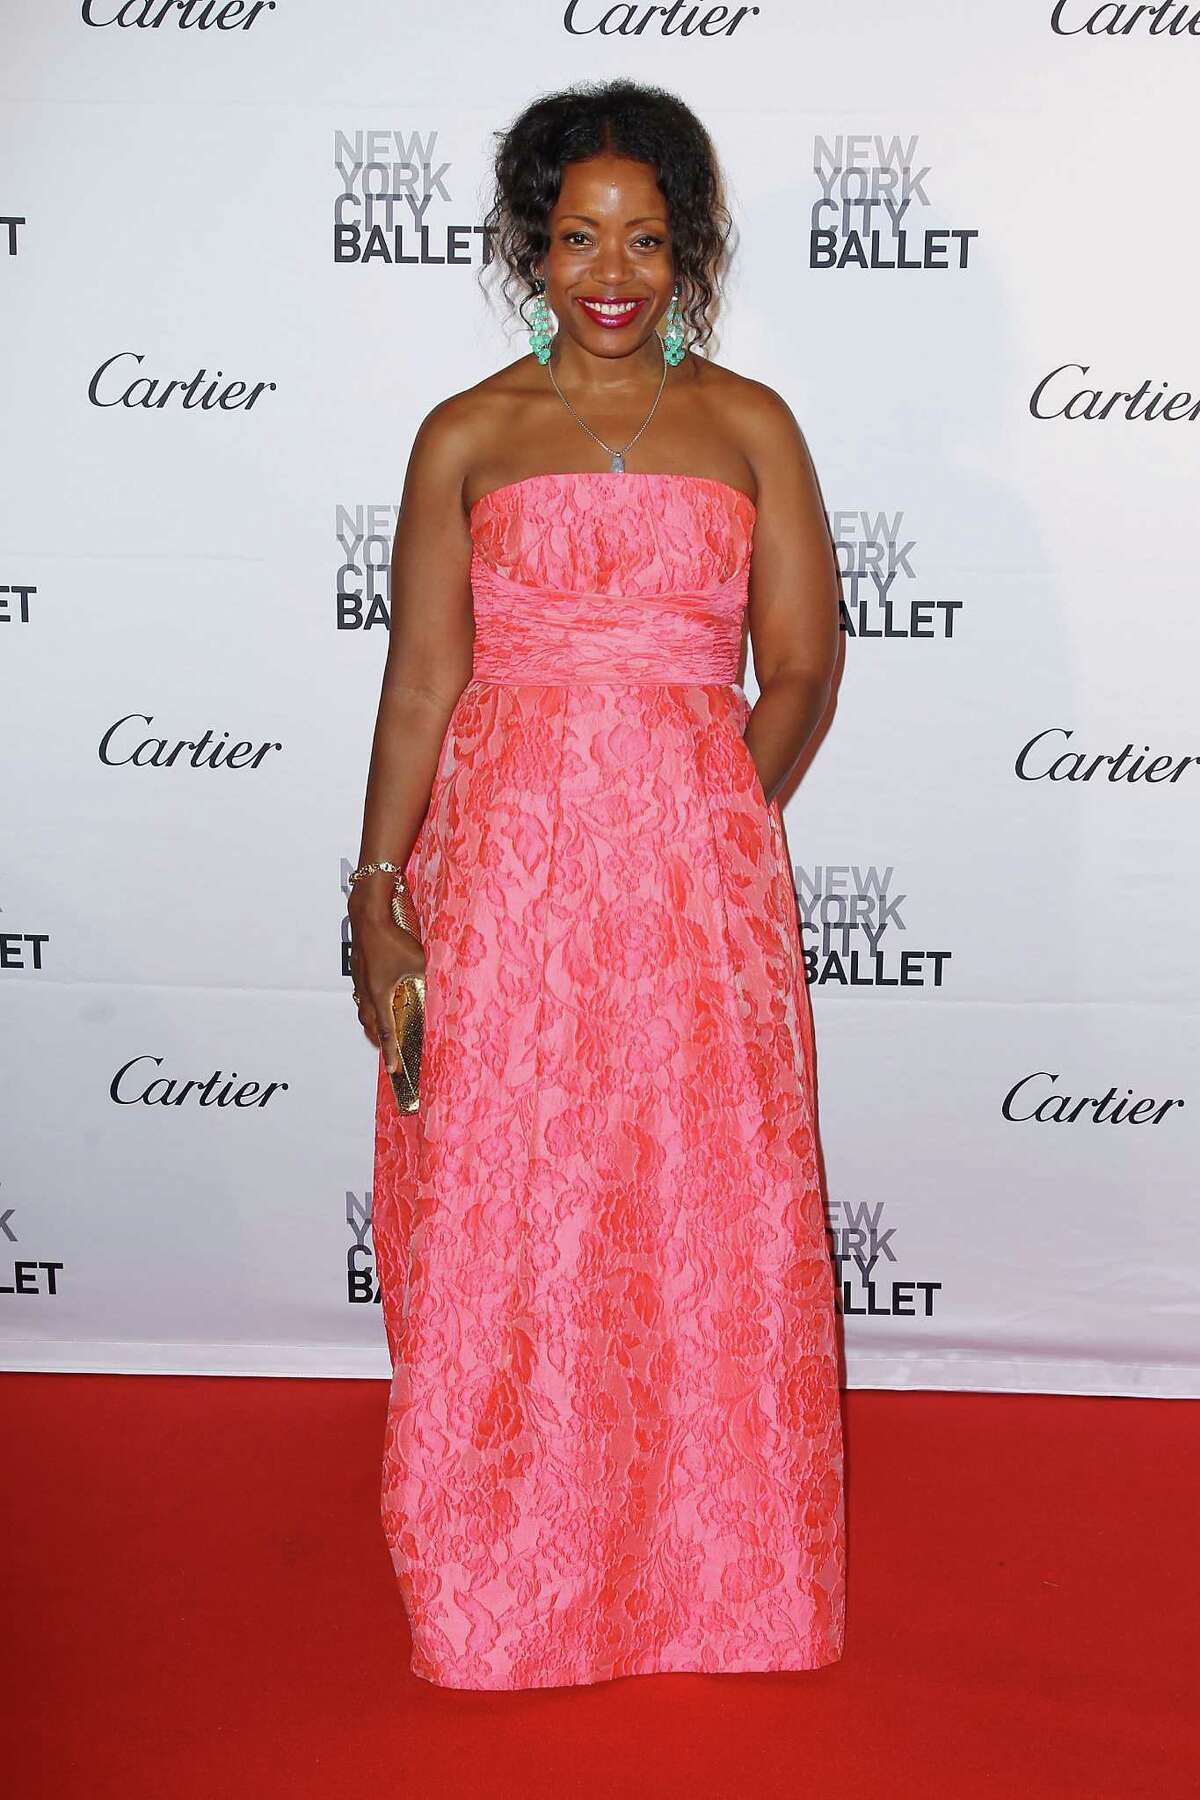 Designer Tracy Reese appears at the New York City Ballet 2015 Fall Gala, Wednesday, Sept. 30, 2015 in New York.